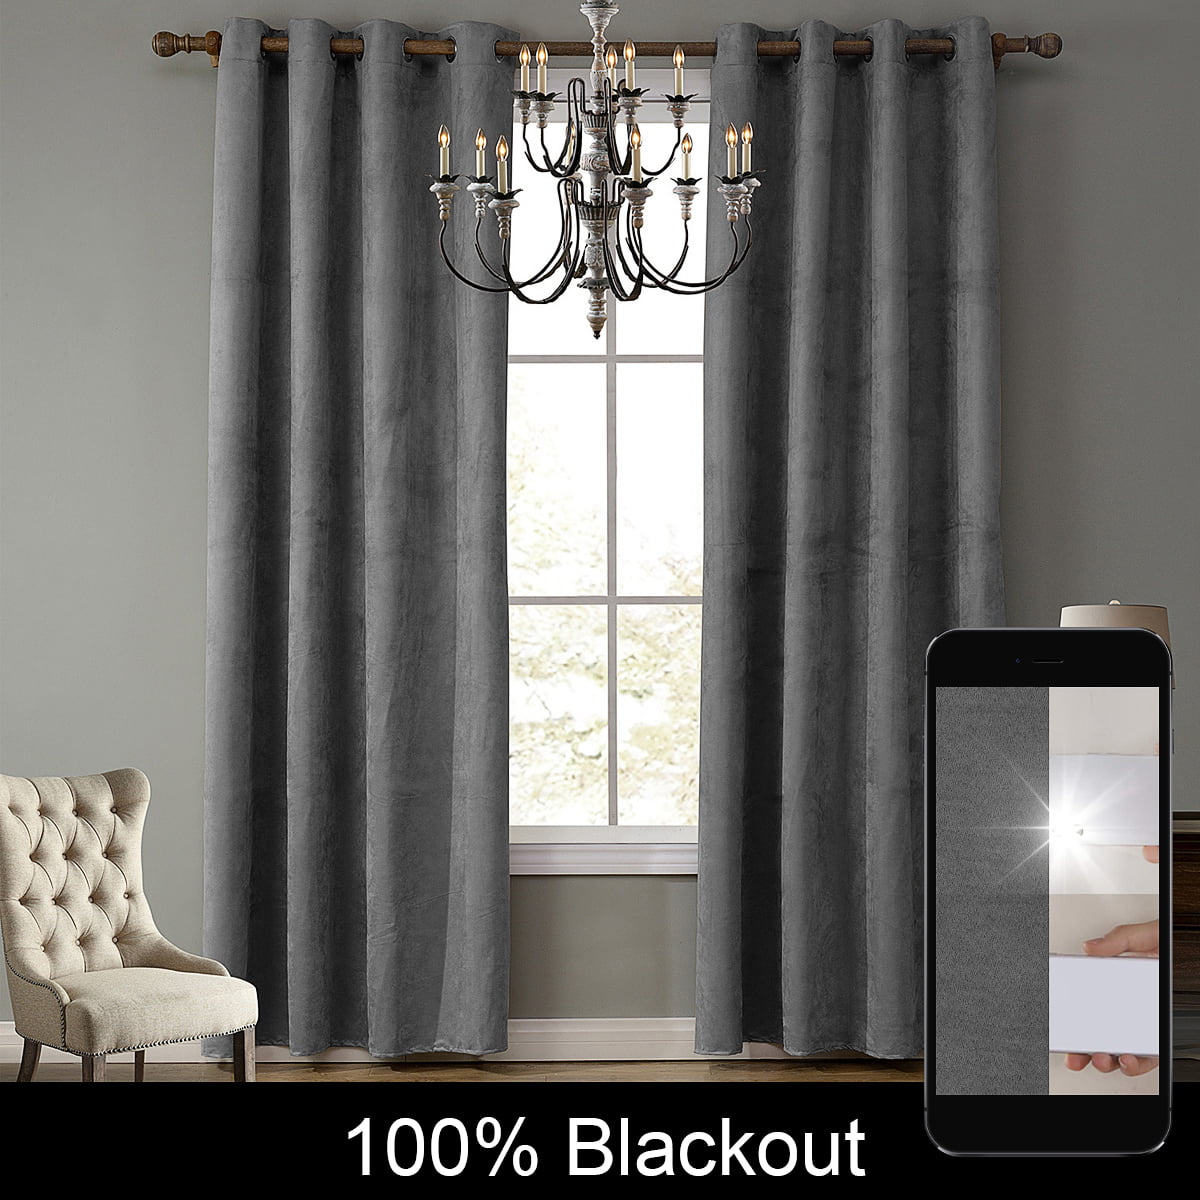 Window 2-Pack Panel Curtain Solid Energy Efficient 100% Blackout Privacy Curtain 